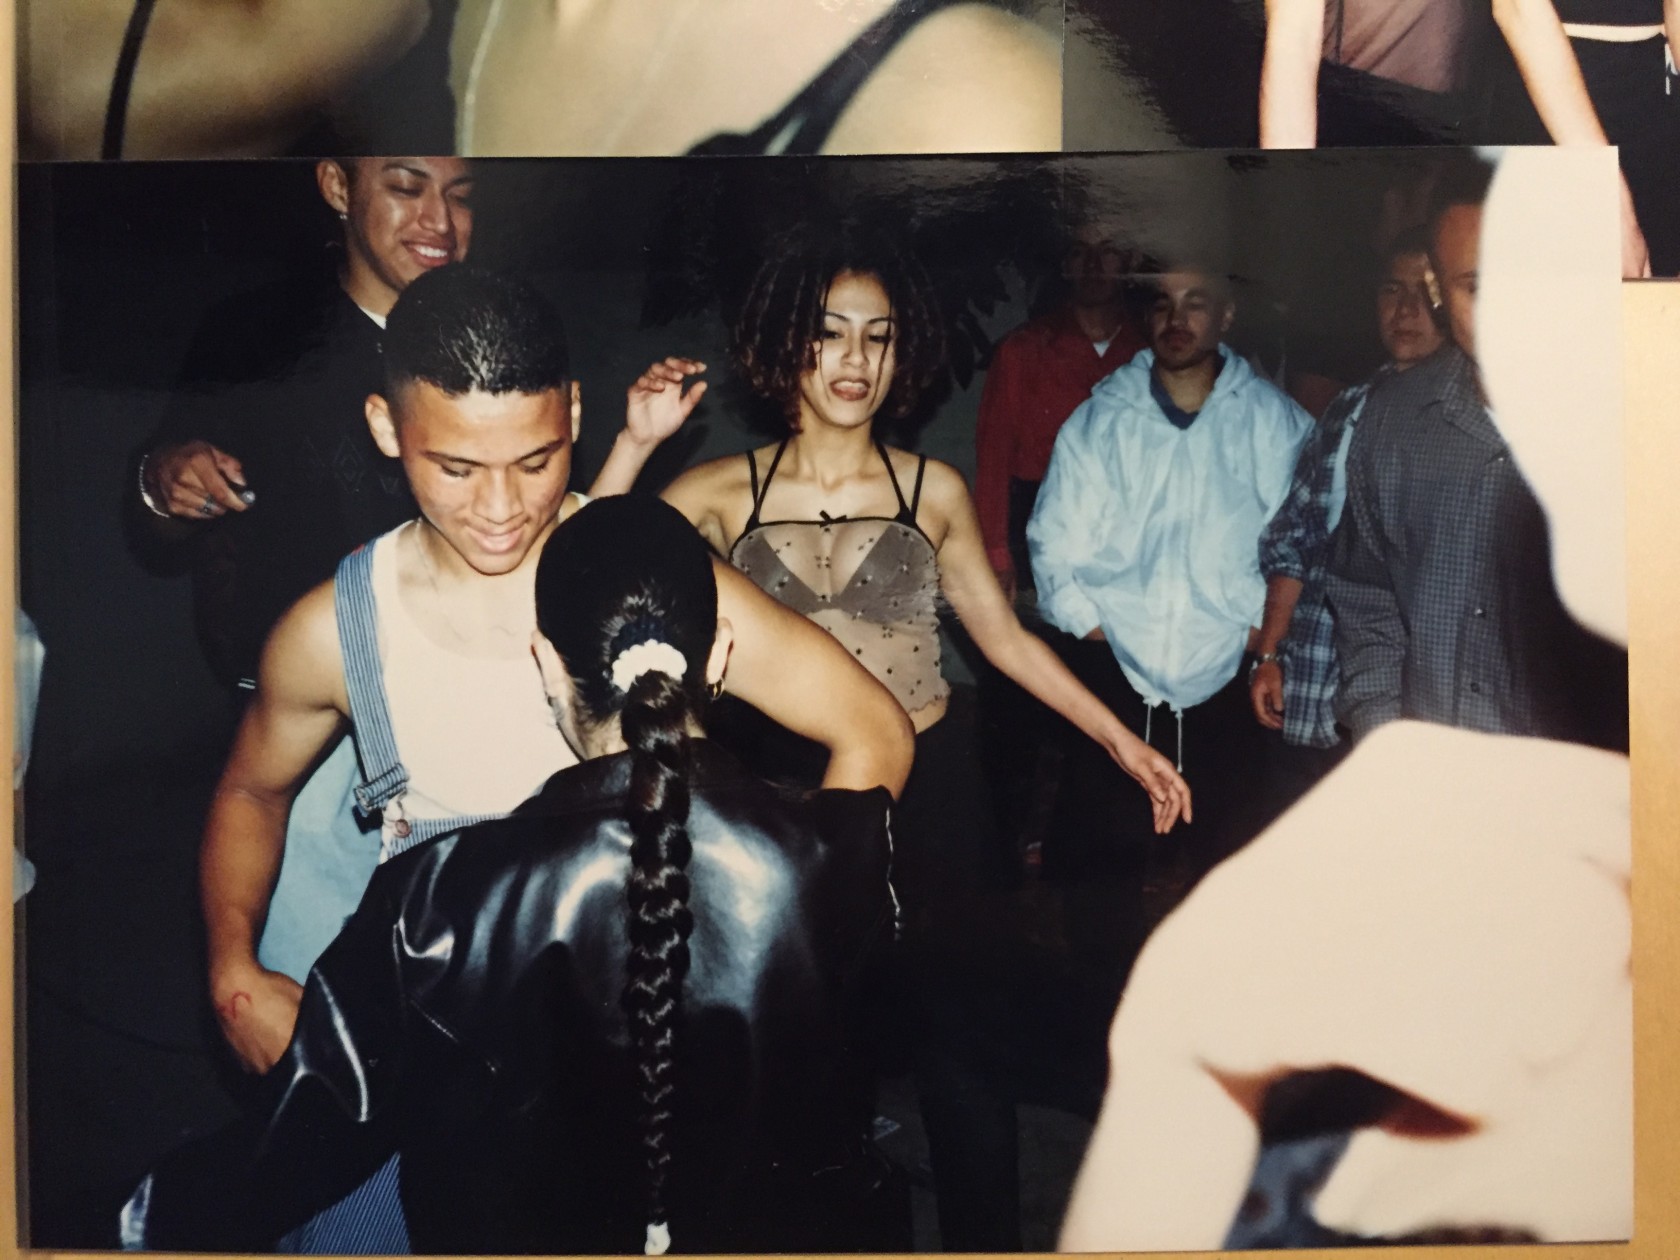 artist unknown, Aztek Nation Crew at a House Party, c-print, 6 x 4 in. (15.24 x 10.16 cm), private collection